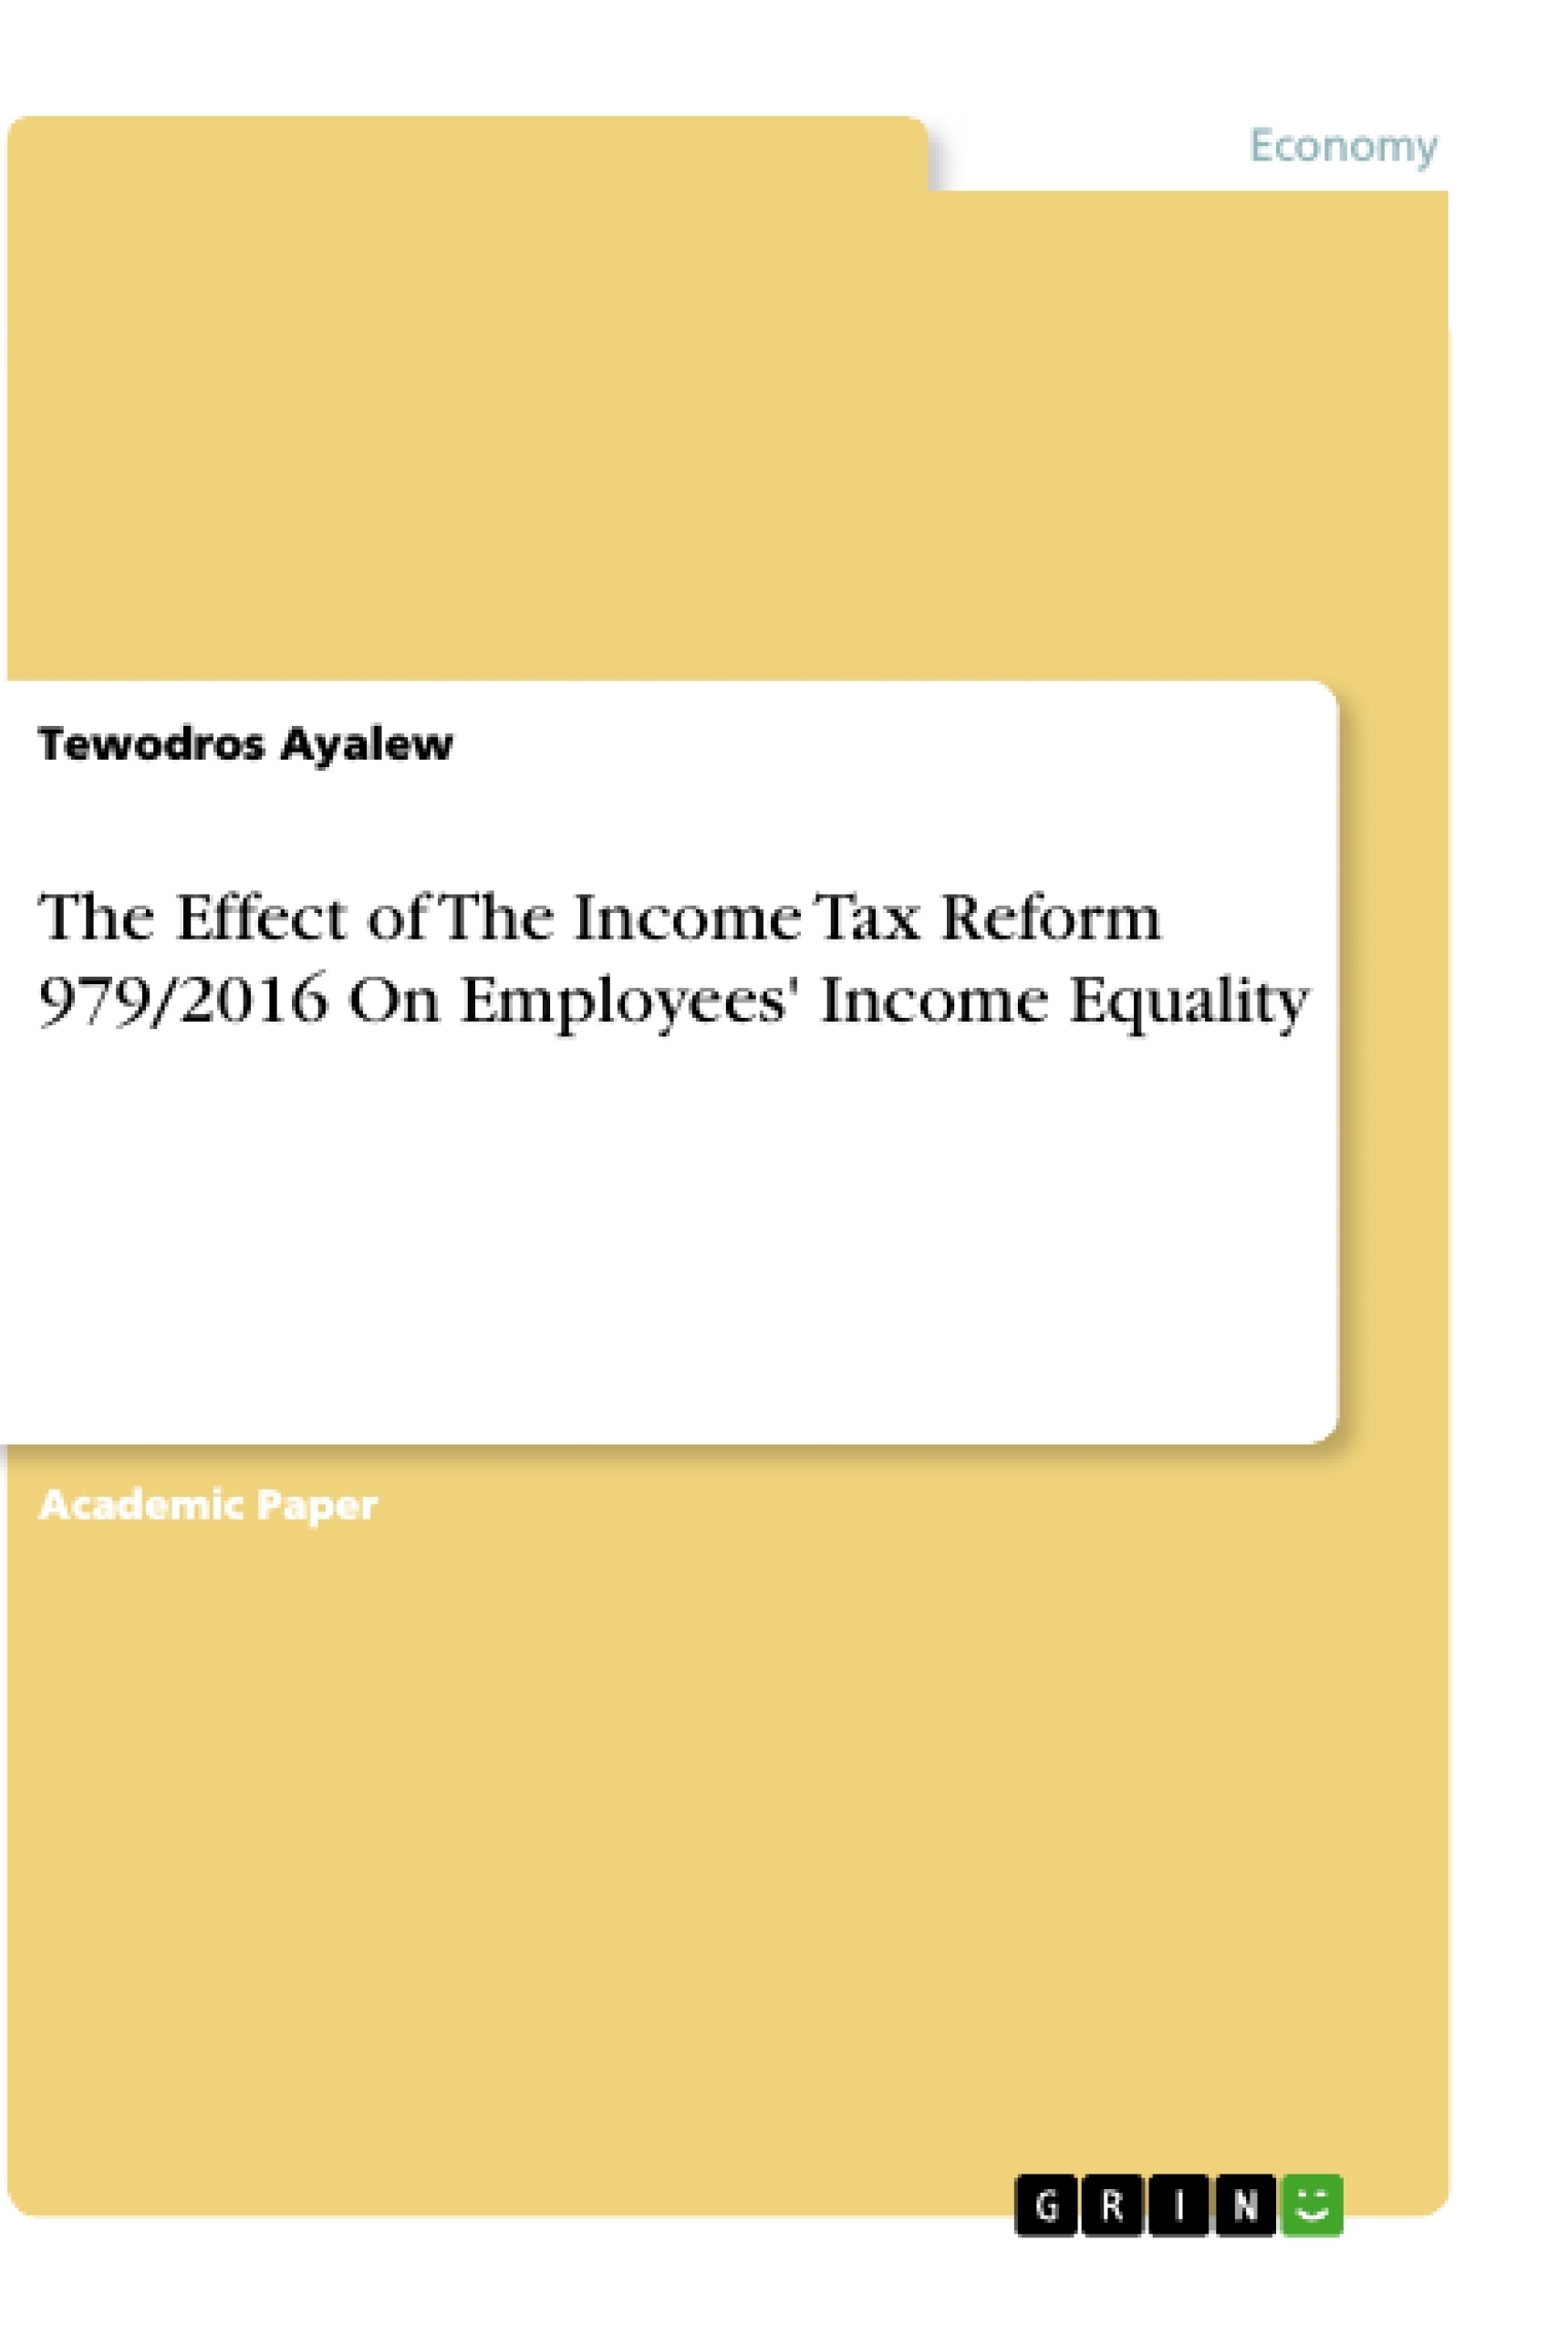 Titre: The Effect of The Income Tax Reform 979/2016 On Employees' Income Equality